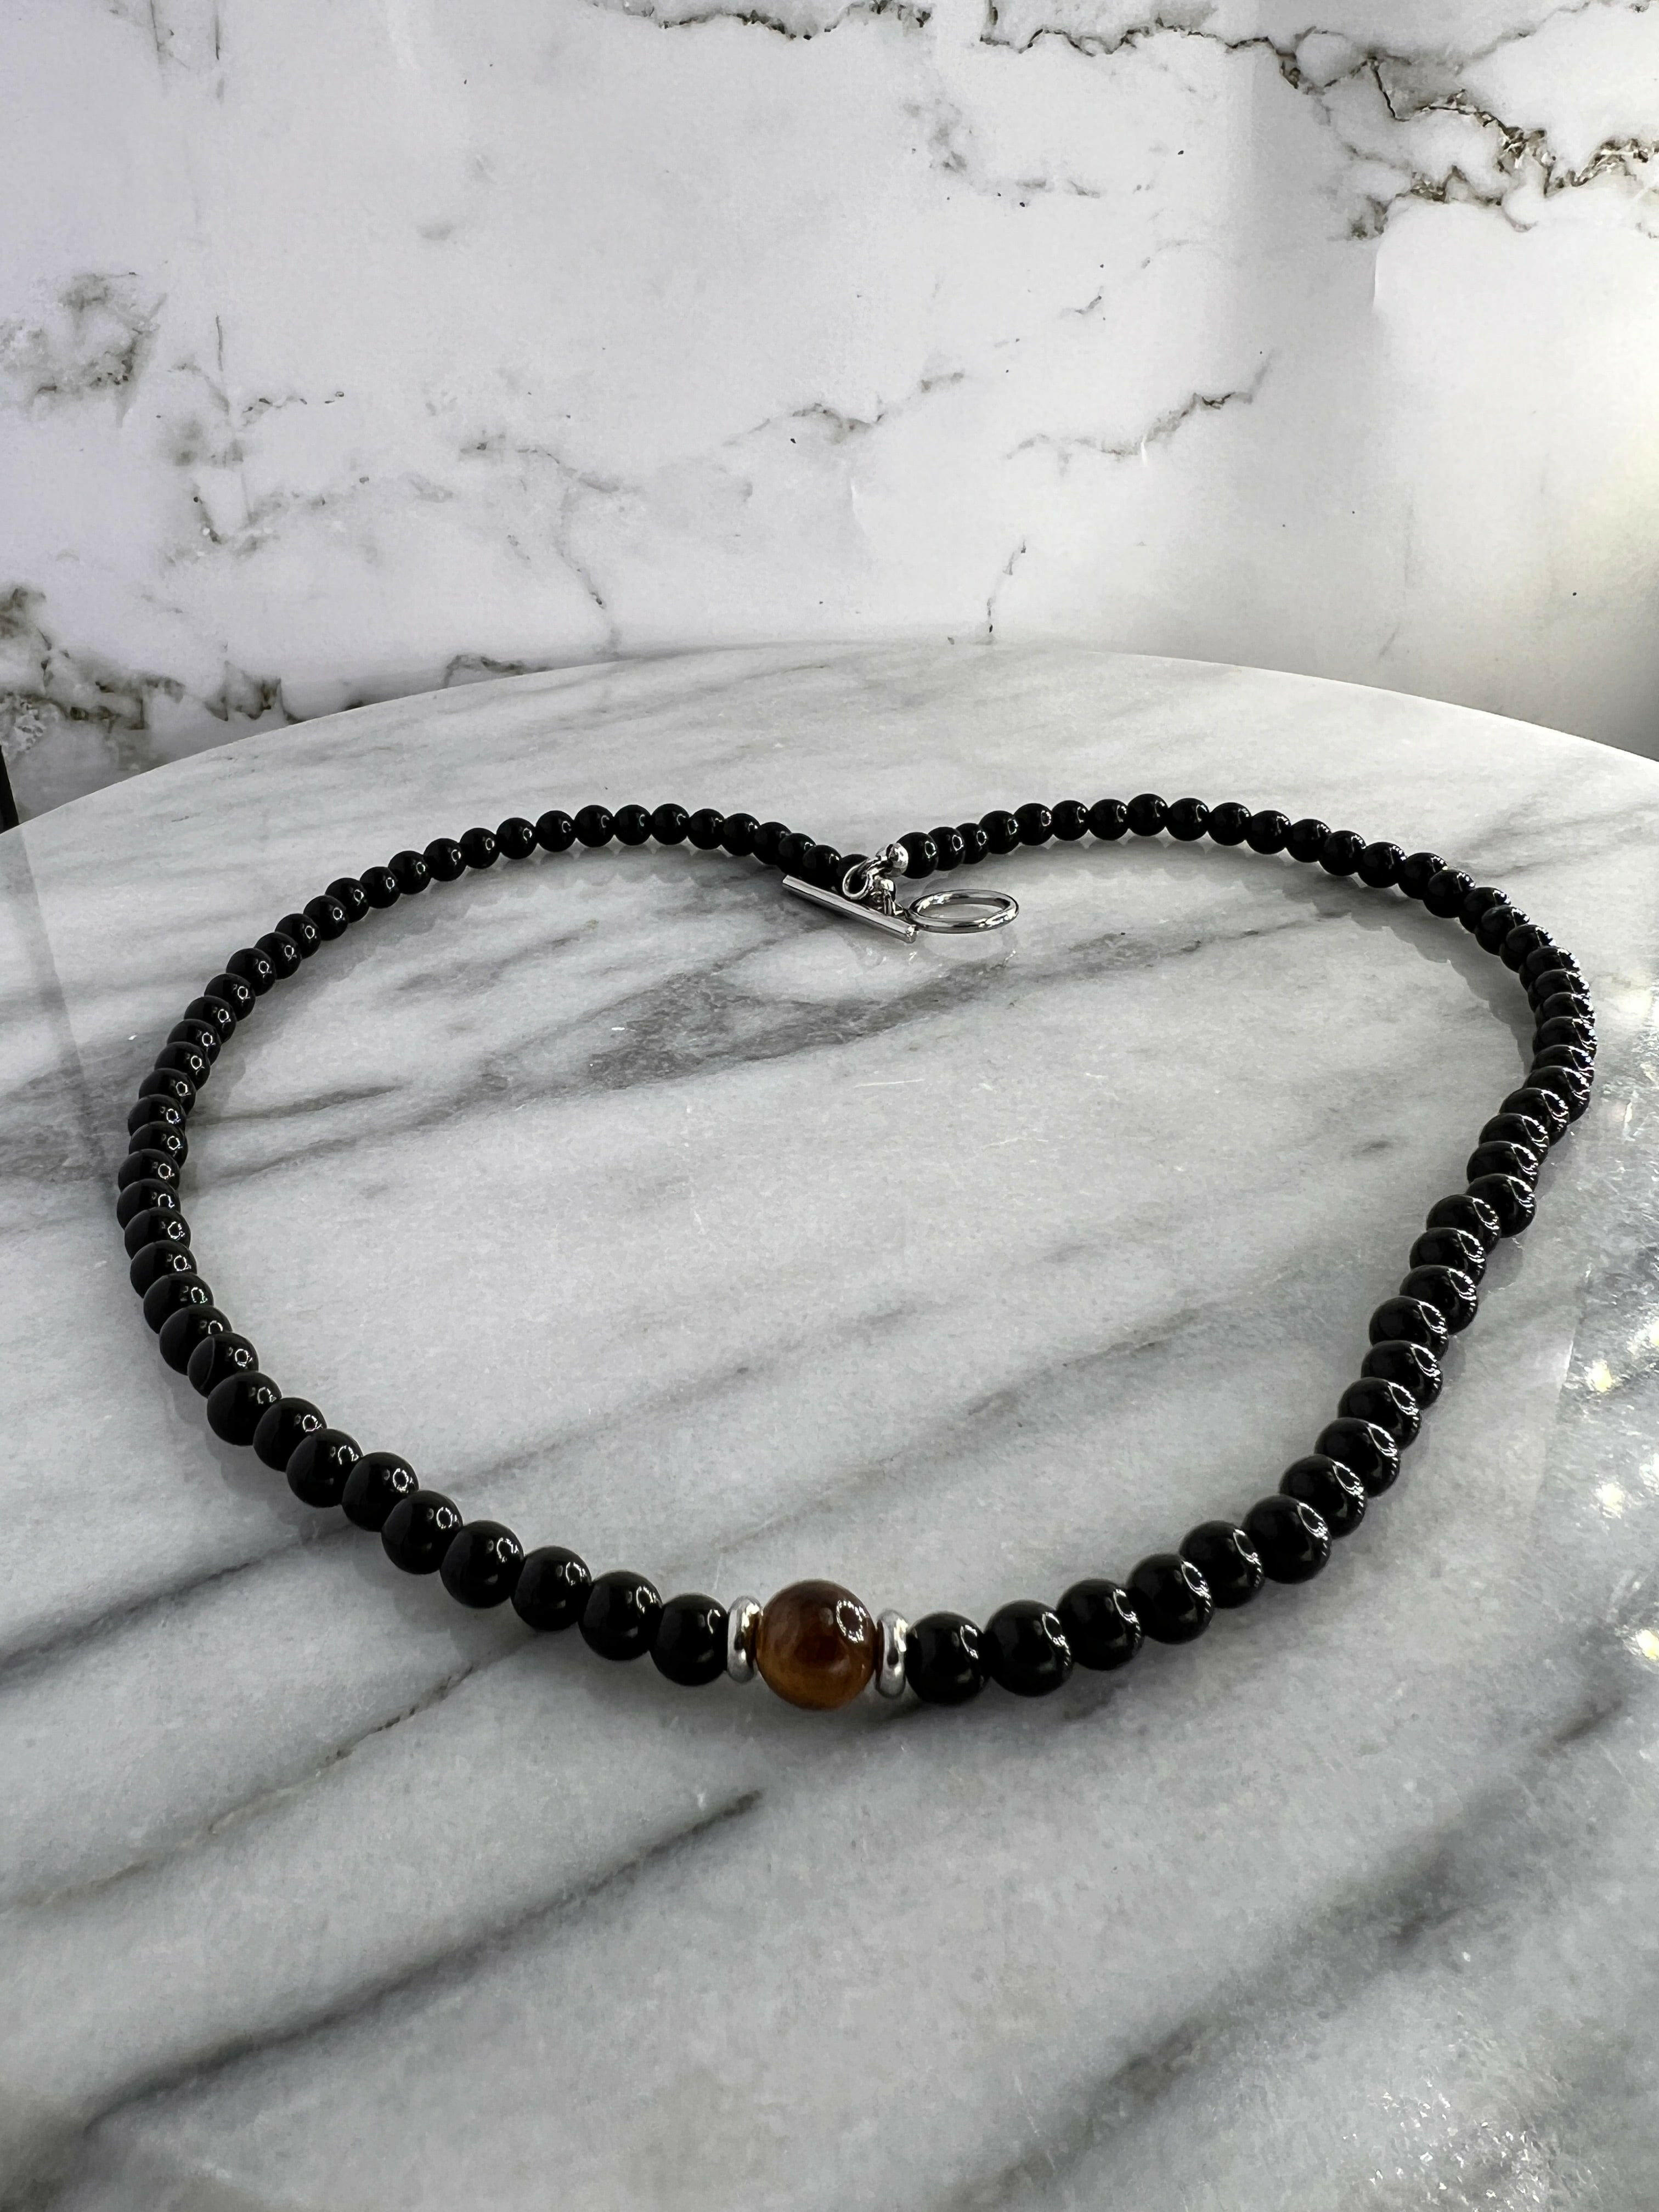 Bec Sue Jewelry Shop Necklaces Onyx Necklace, Onyx and Tiger Eye Necklace 6mm beads Tags